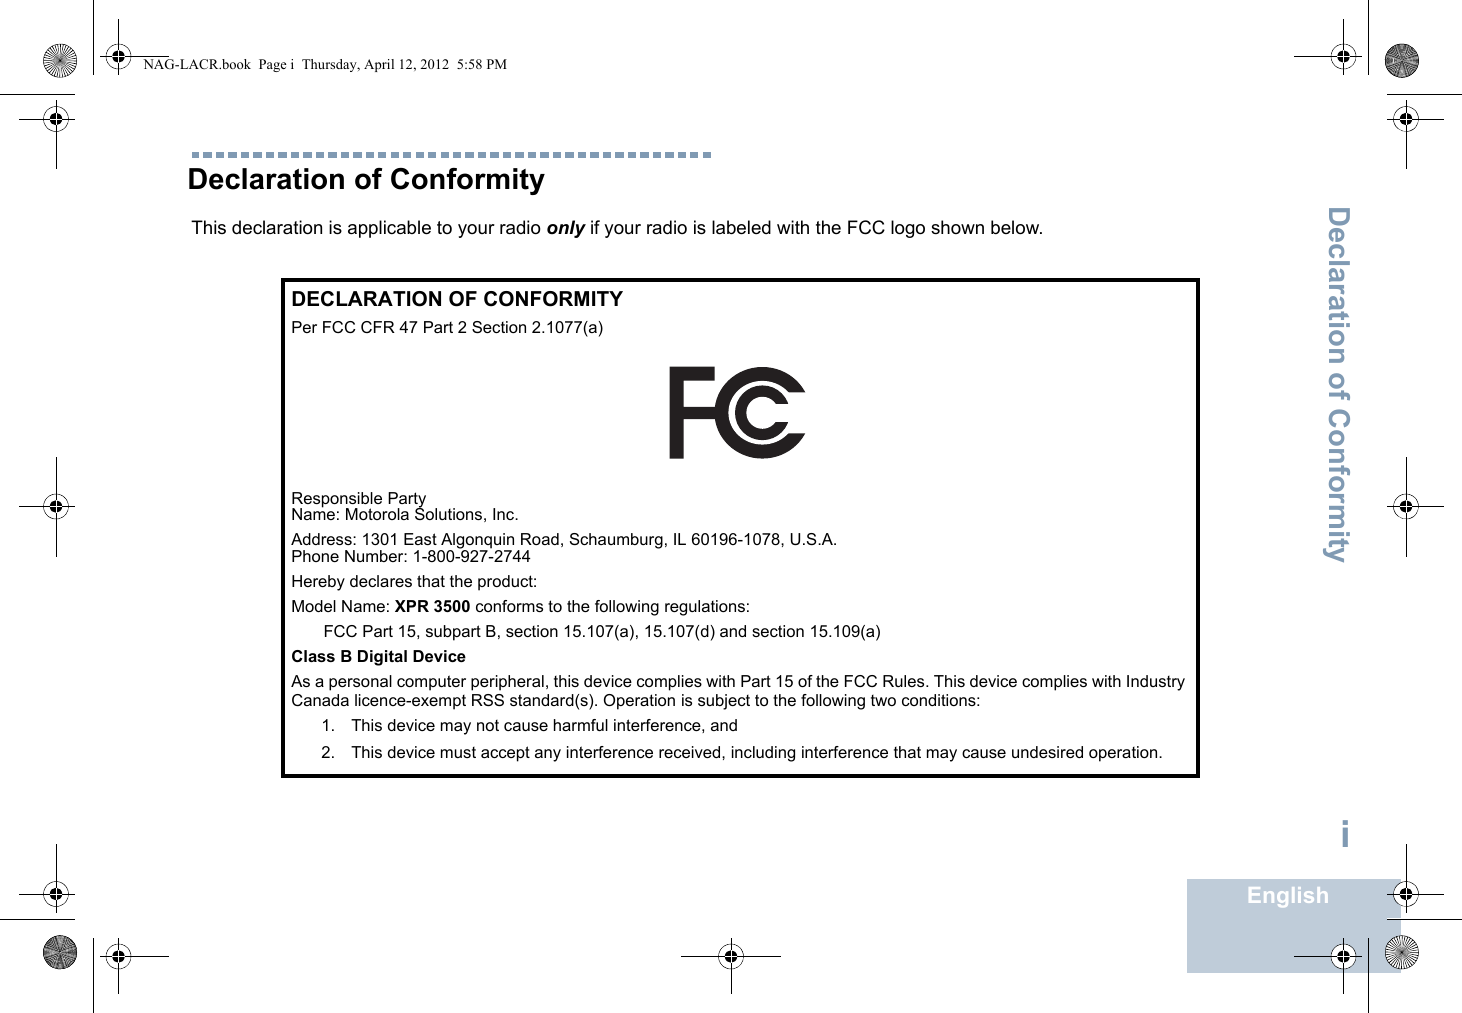 Declaration of ConformityEnglishiDeclaration of ConformityThis declaration is applicable to your radio only if your radio is labeled with the FCC logo shown below.DECLARATION OF CONFORMITYPer FCC CFR 47 Part 2 Section 2.1077(a)Responsible Party Name: Motorola Solutions, Inc.Address: 1301 East Algonquin Road, Schaumburg, IL 60196-1078, U.S.A.Phone Number: 1-800-927-2744Hereby declares that the product:Model Name: XPR 3500 conforms to the following regulations:FCC Part 15, subpart B, section 15.107(a), 15.107(d) and section 15.109(a)Class B Digital DeviceAs a personal computer peripheral, this device complies with Part 15 of the FCC Rules. This device complies with Industry Canada licence-exempt RSS standard(s). Operation is subject to the following two conditions:1. This device may not cause harmful interference, and 2. This device must accept any interference received, including interference that may cause undesired operation.NAG-LACR.book  Page i  Thursday, April 12, 2012  5:58 PM